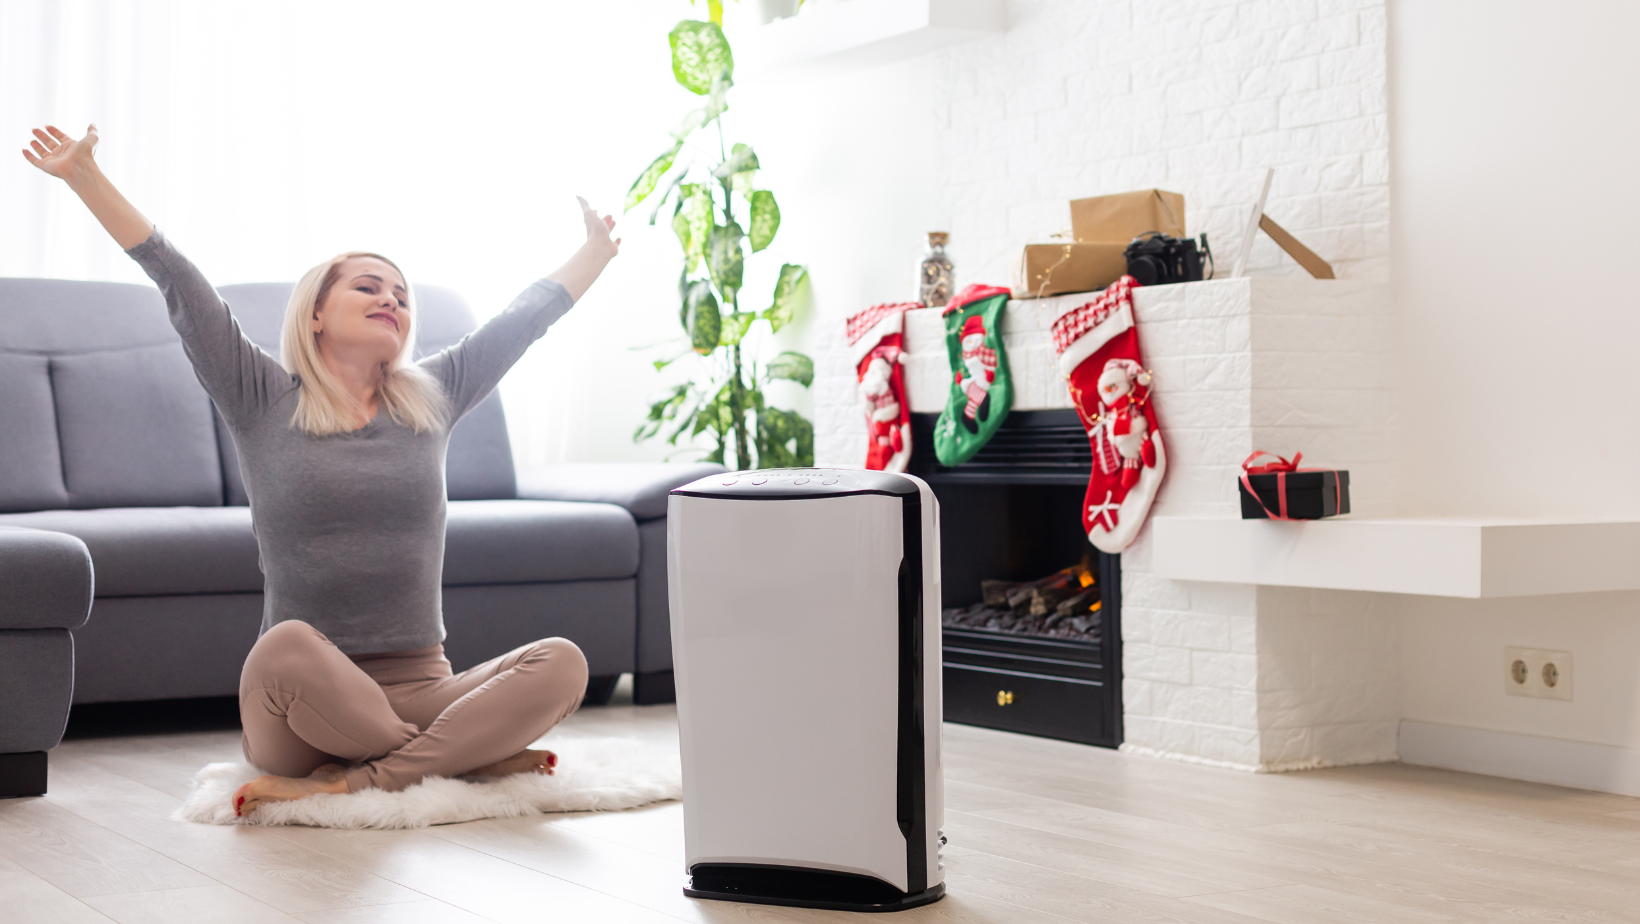 Air purifier in the living room with a woman, indoor plants, Christmas stockings, and a fireplace in the background.